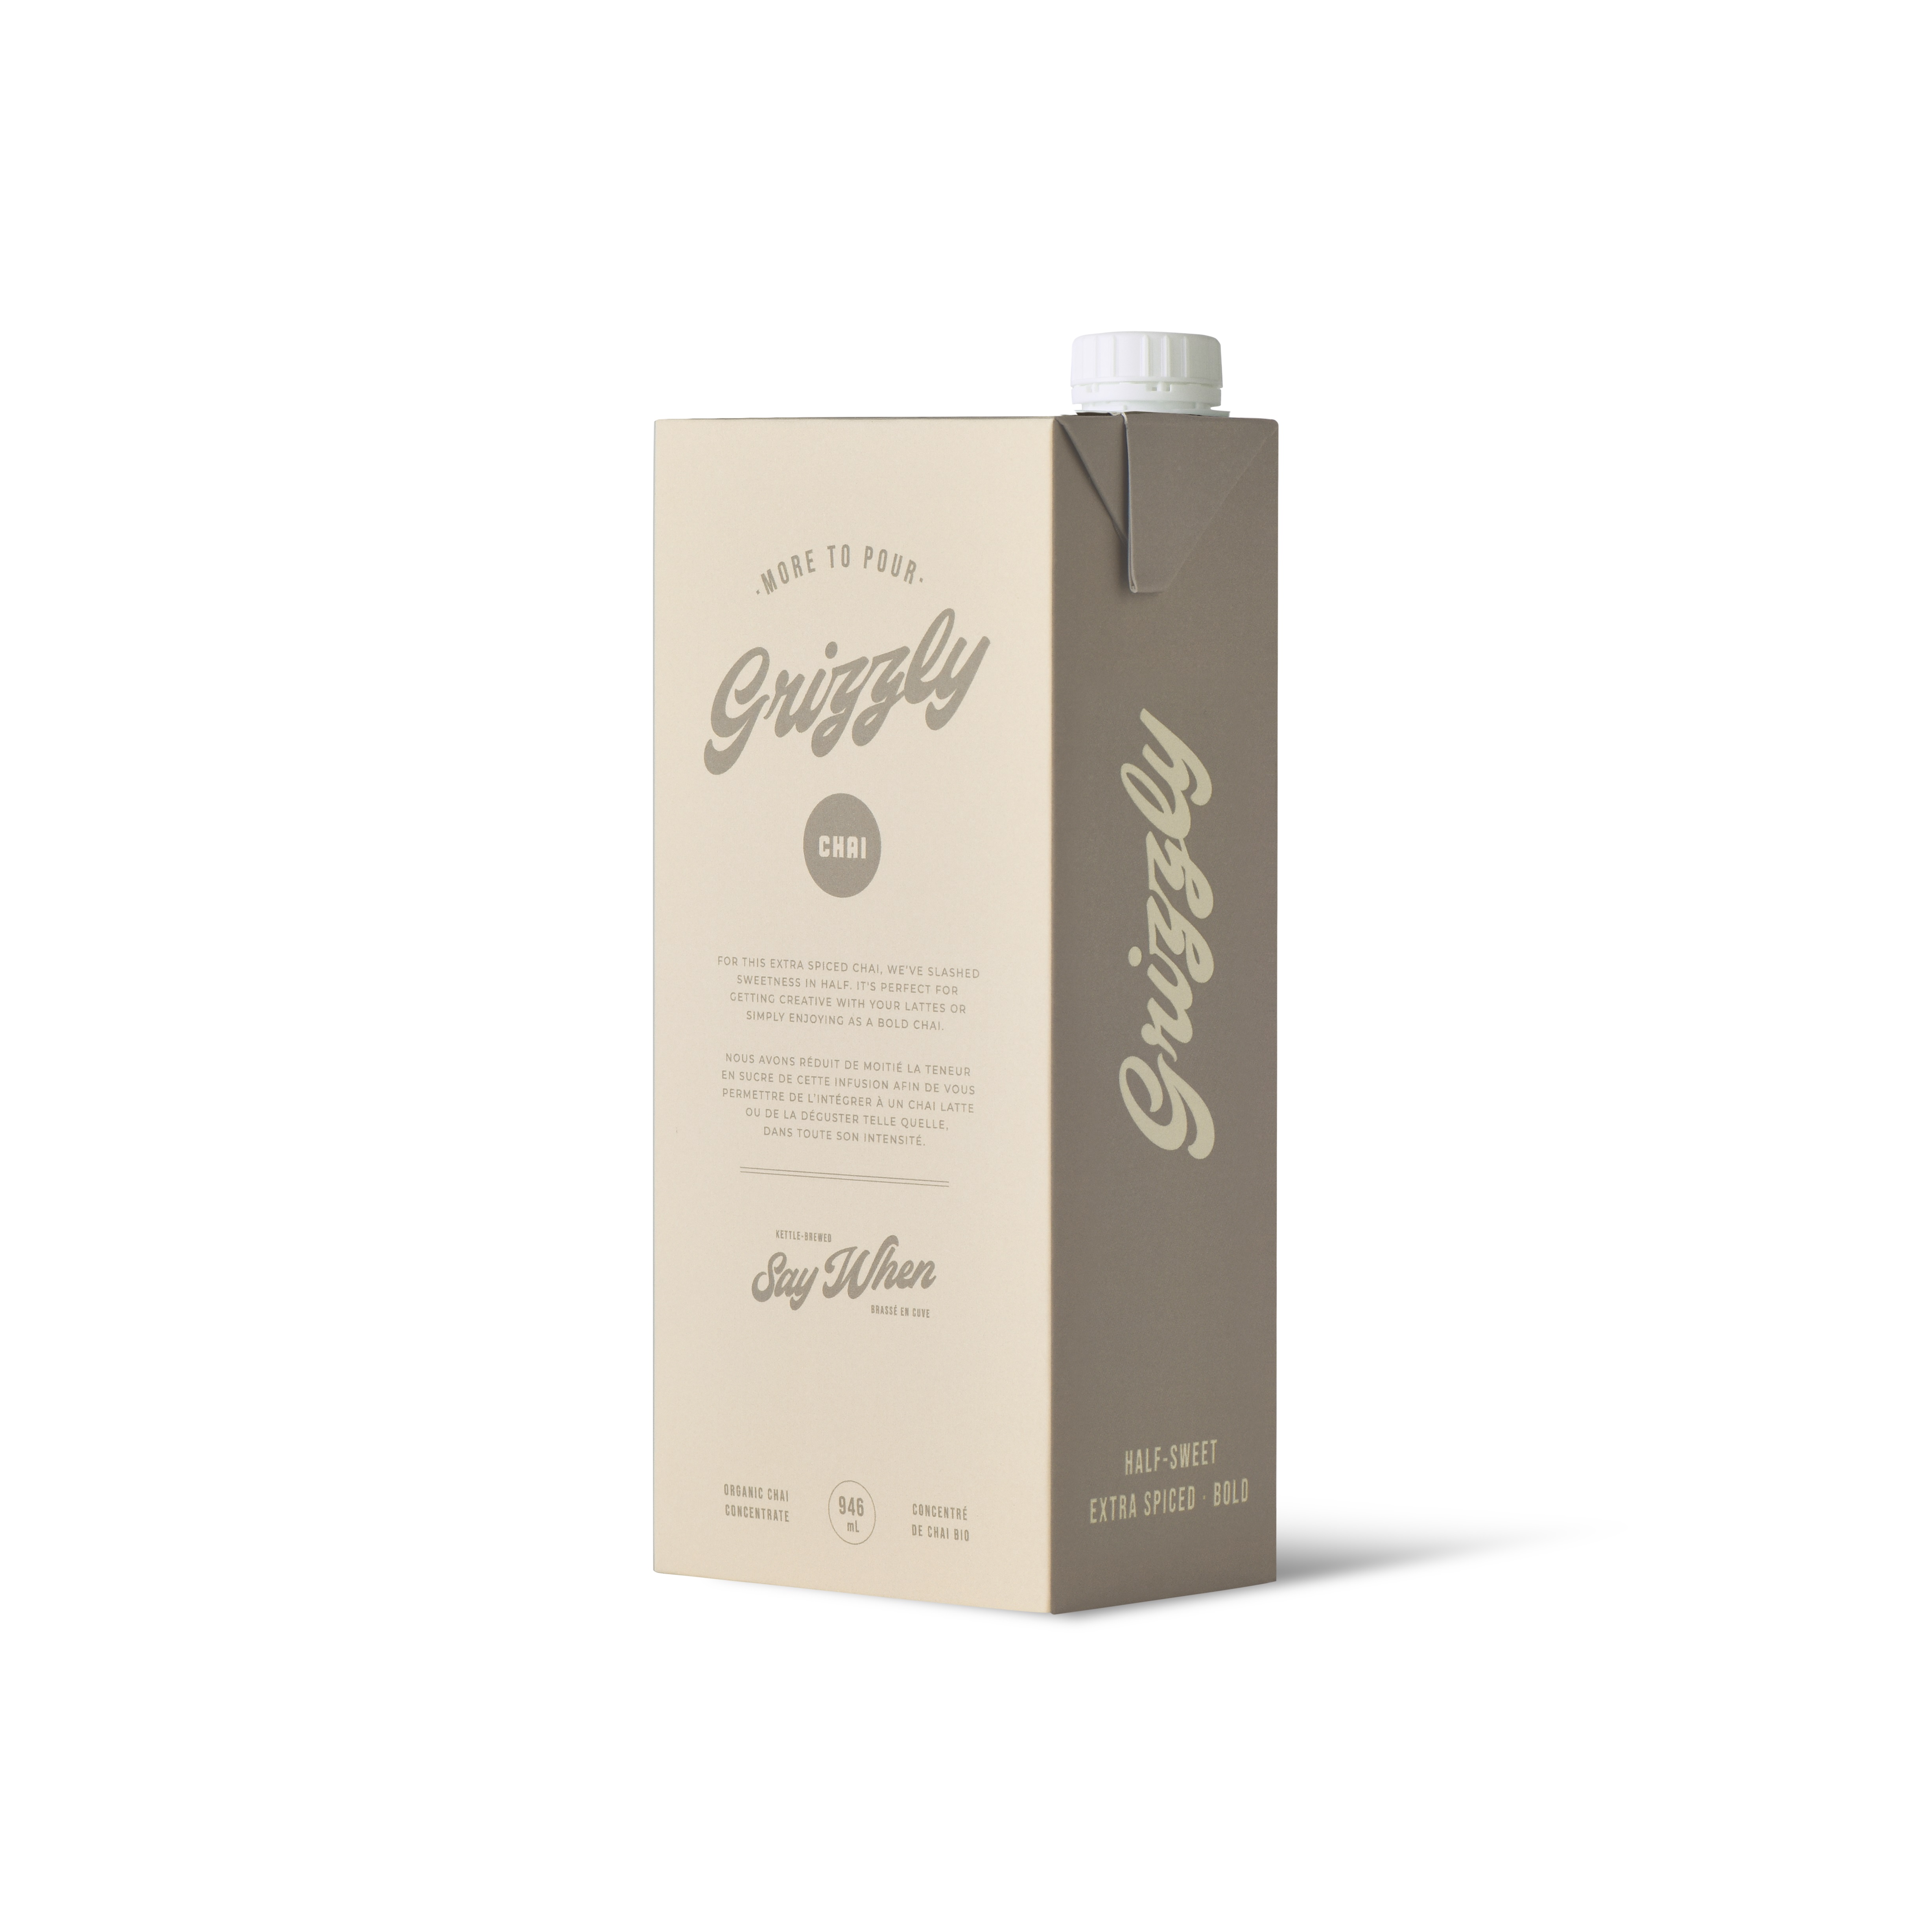 Organic Grizzly Chai Concentrate